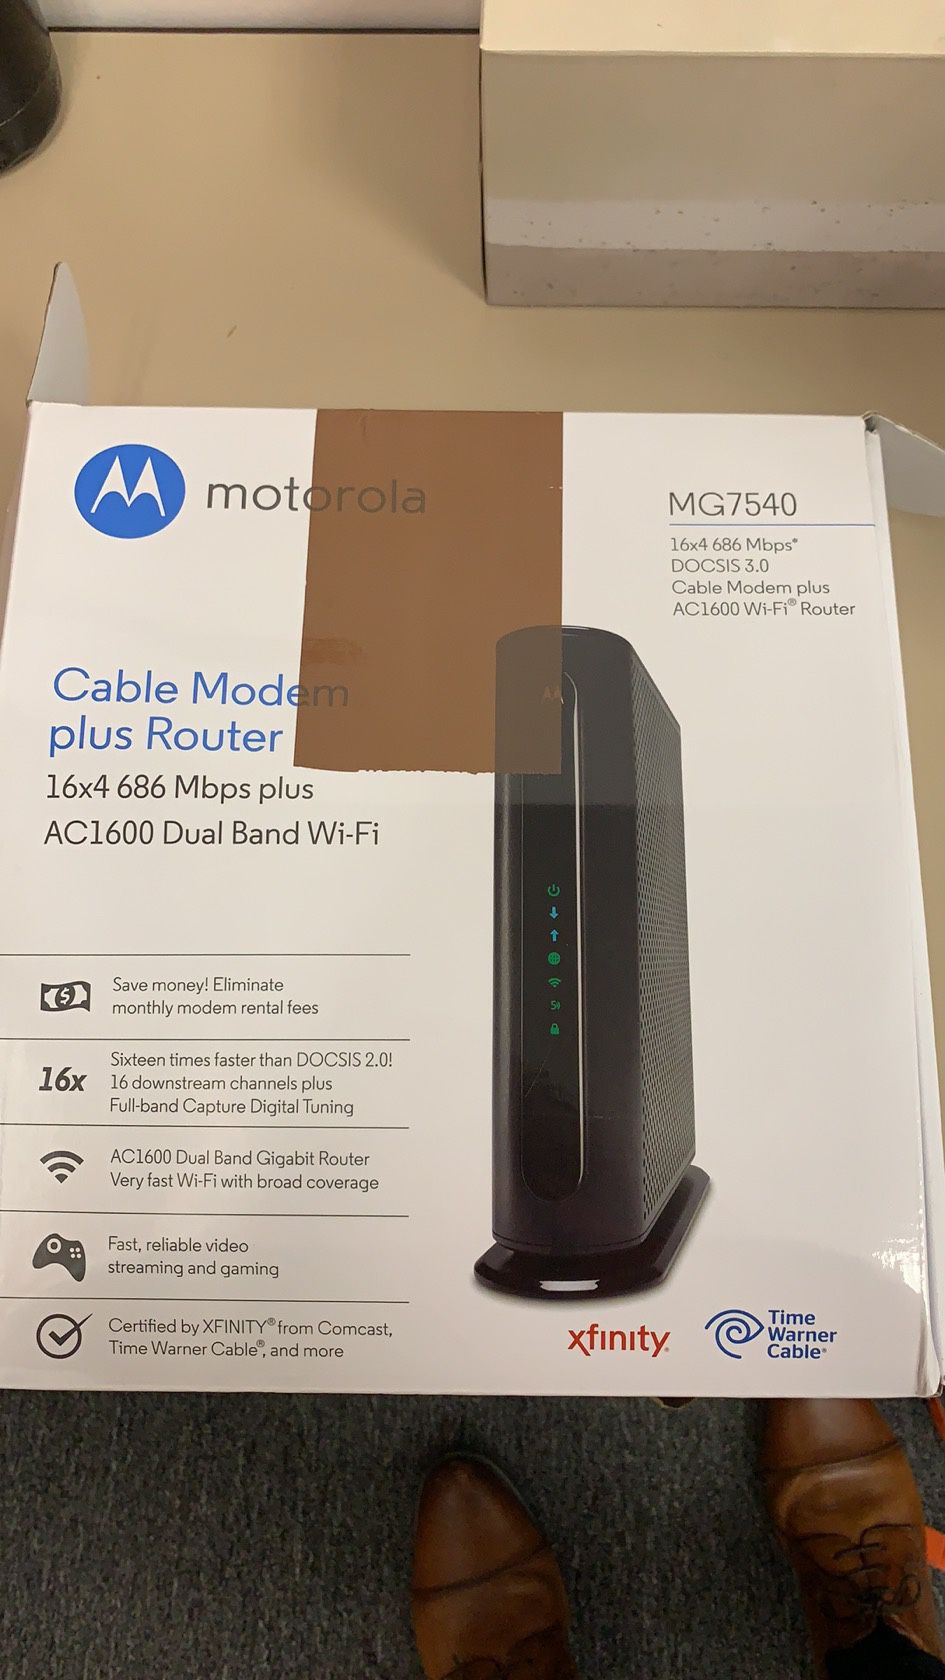 Motorola mg7540 modem and router